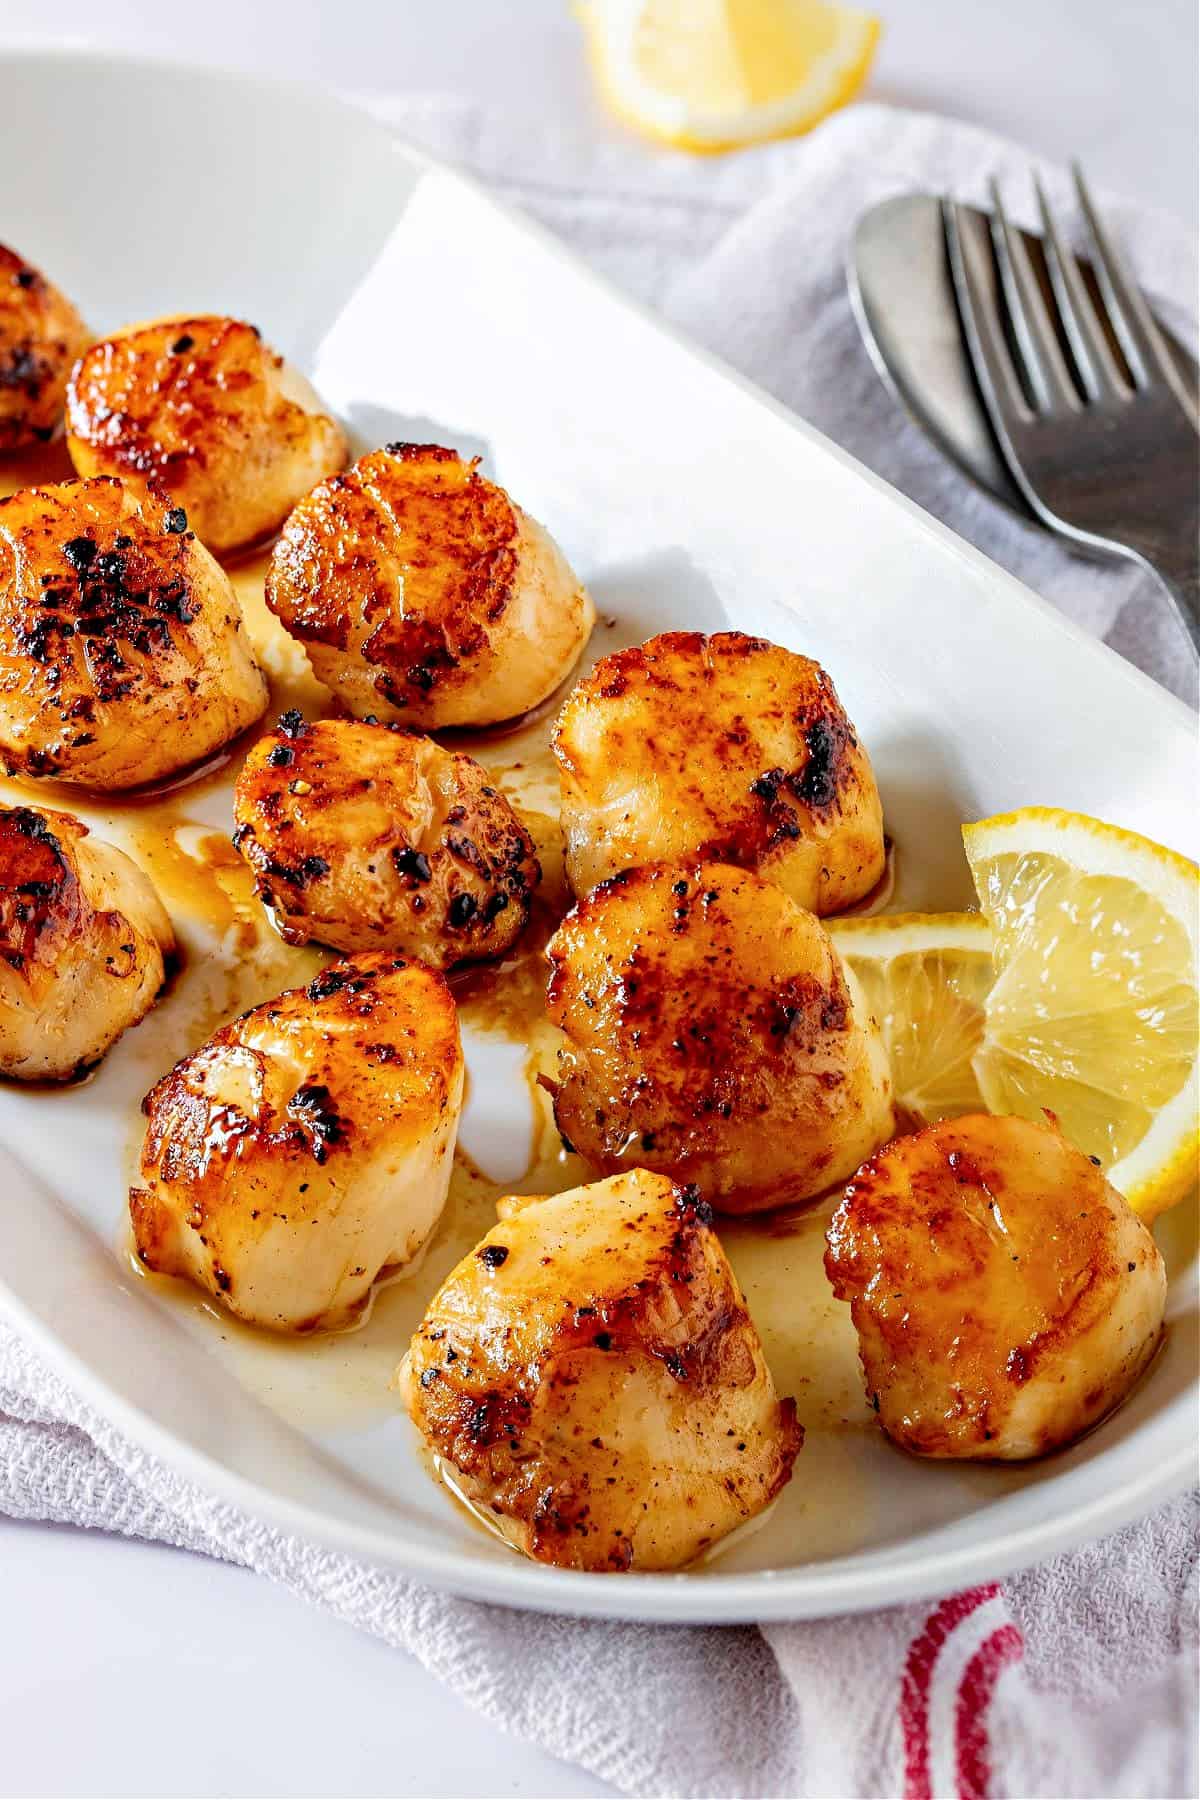 Seared Scallops with lemon on a plate